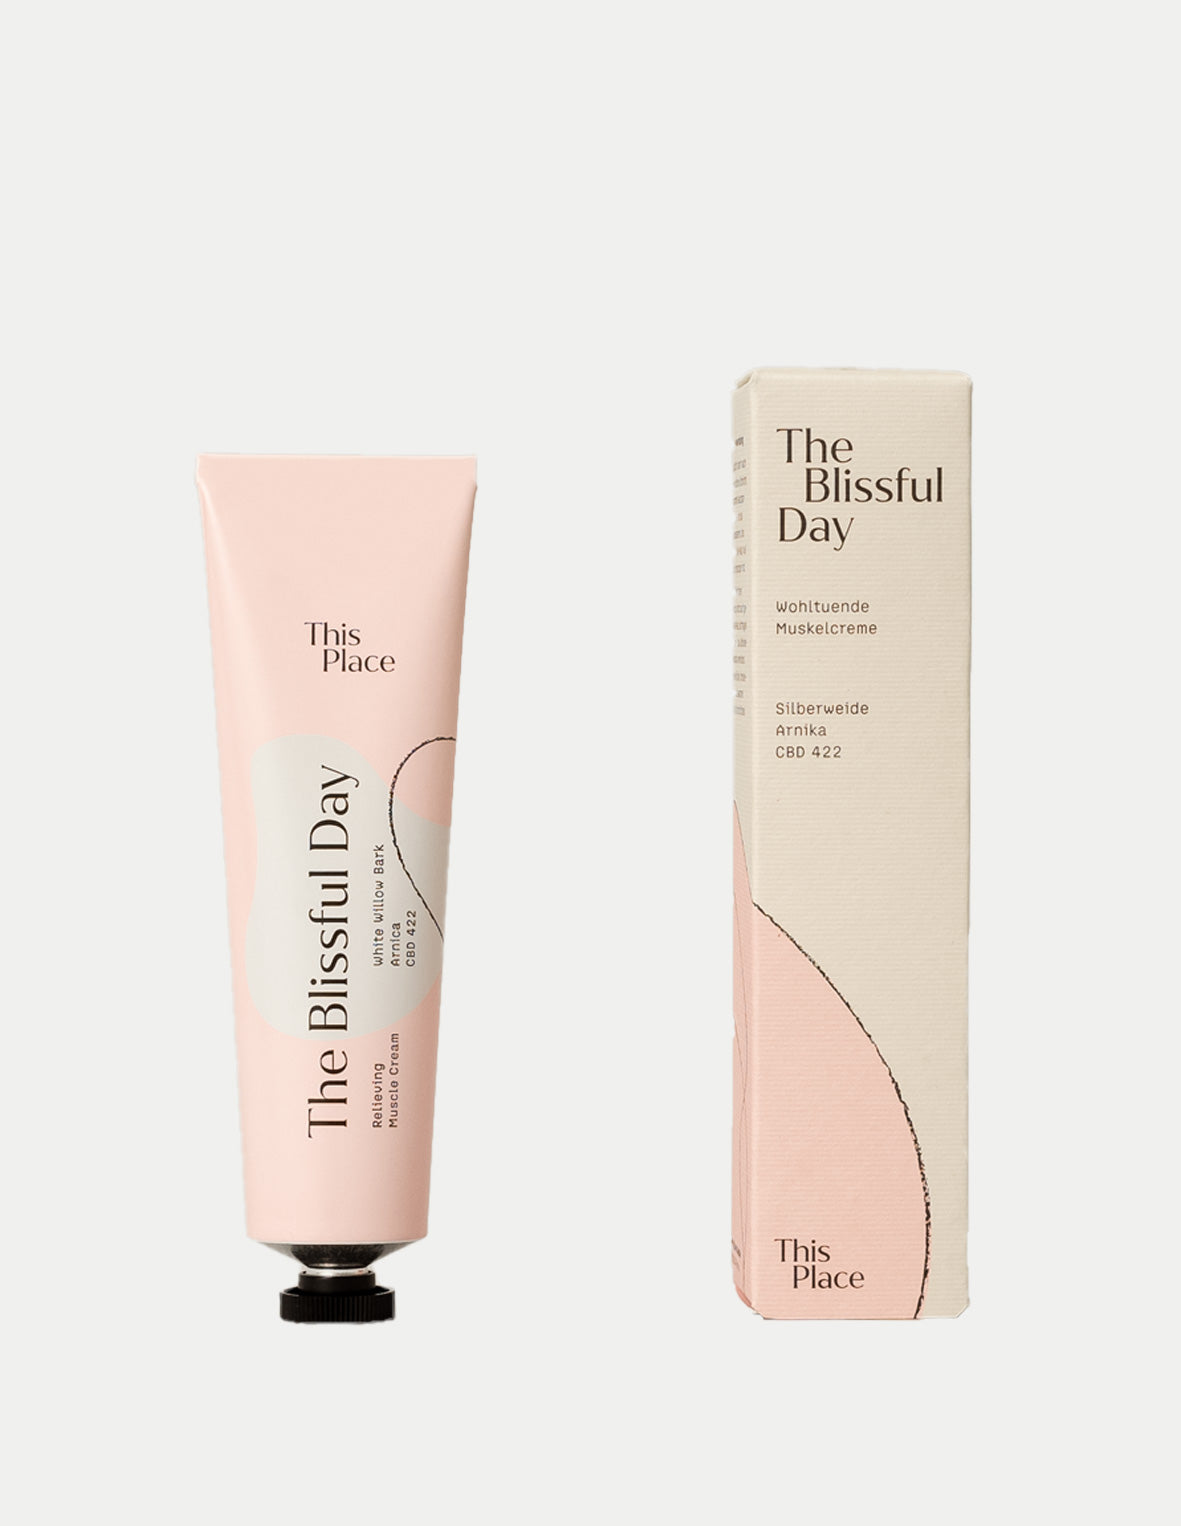 The Blissful Day | Wohltuende Muskelcreme